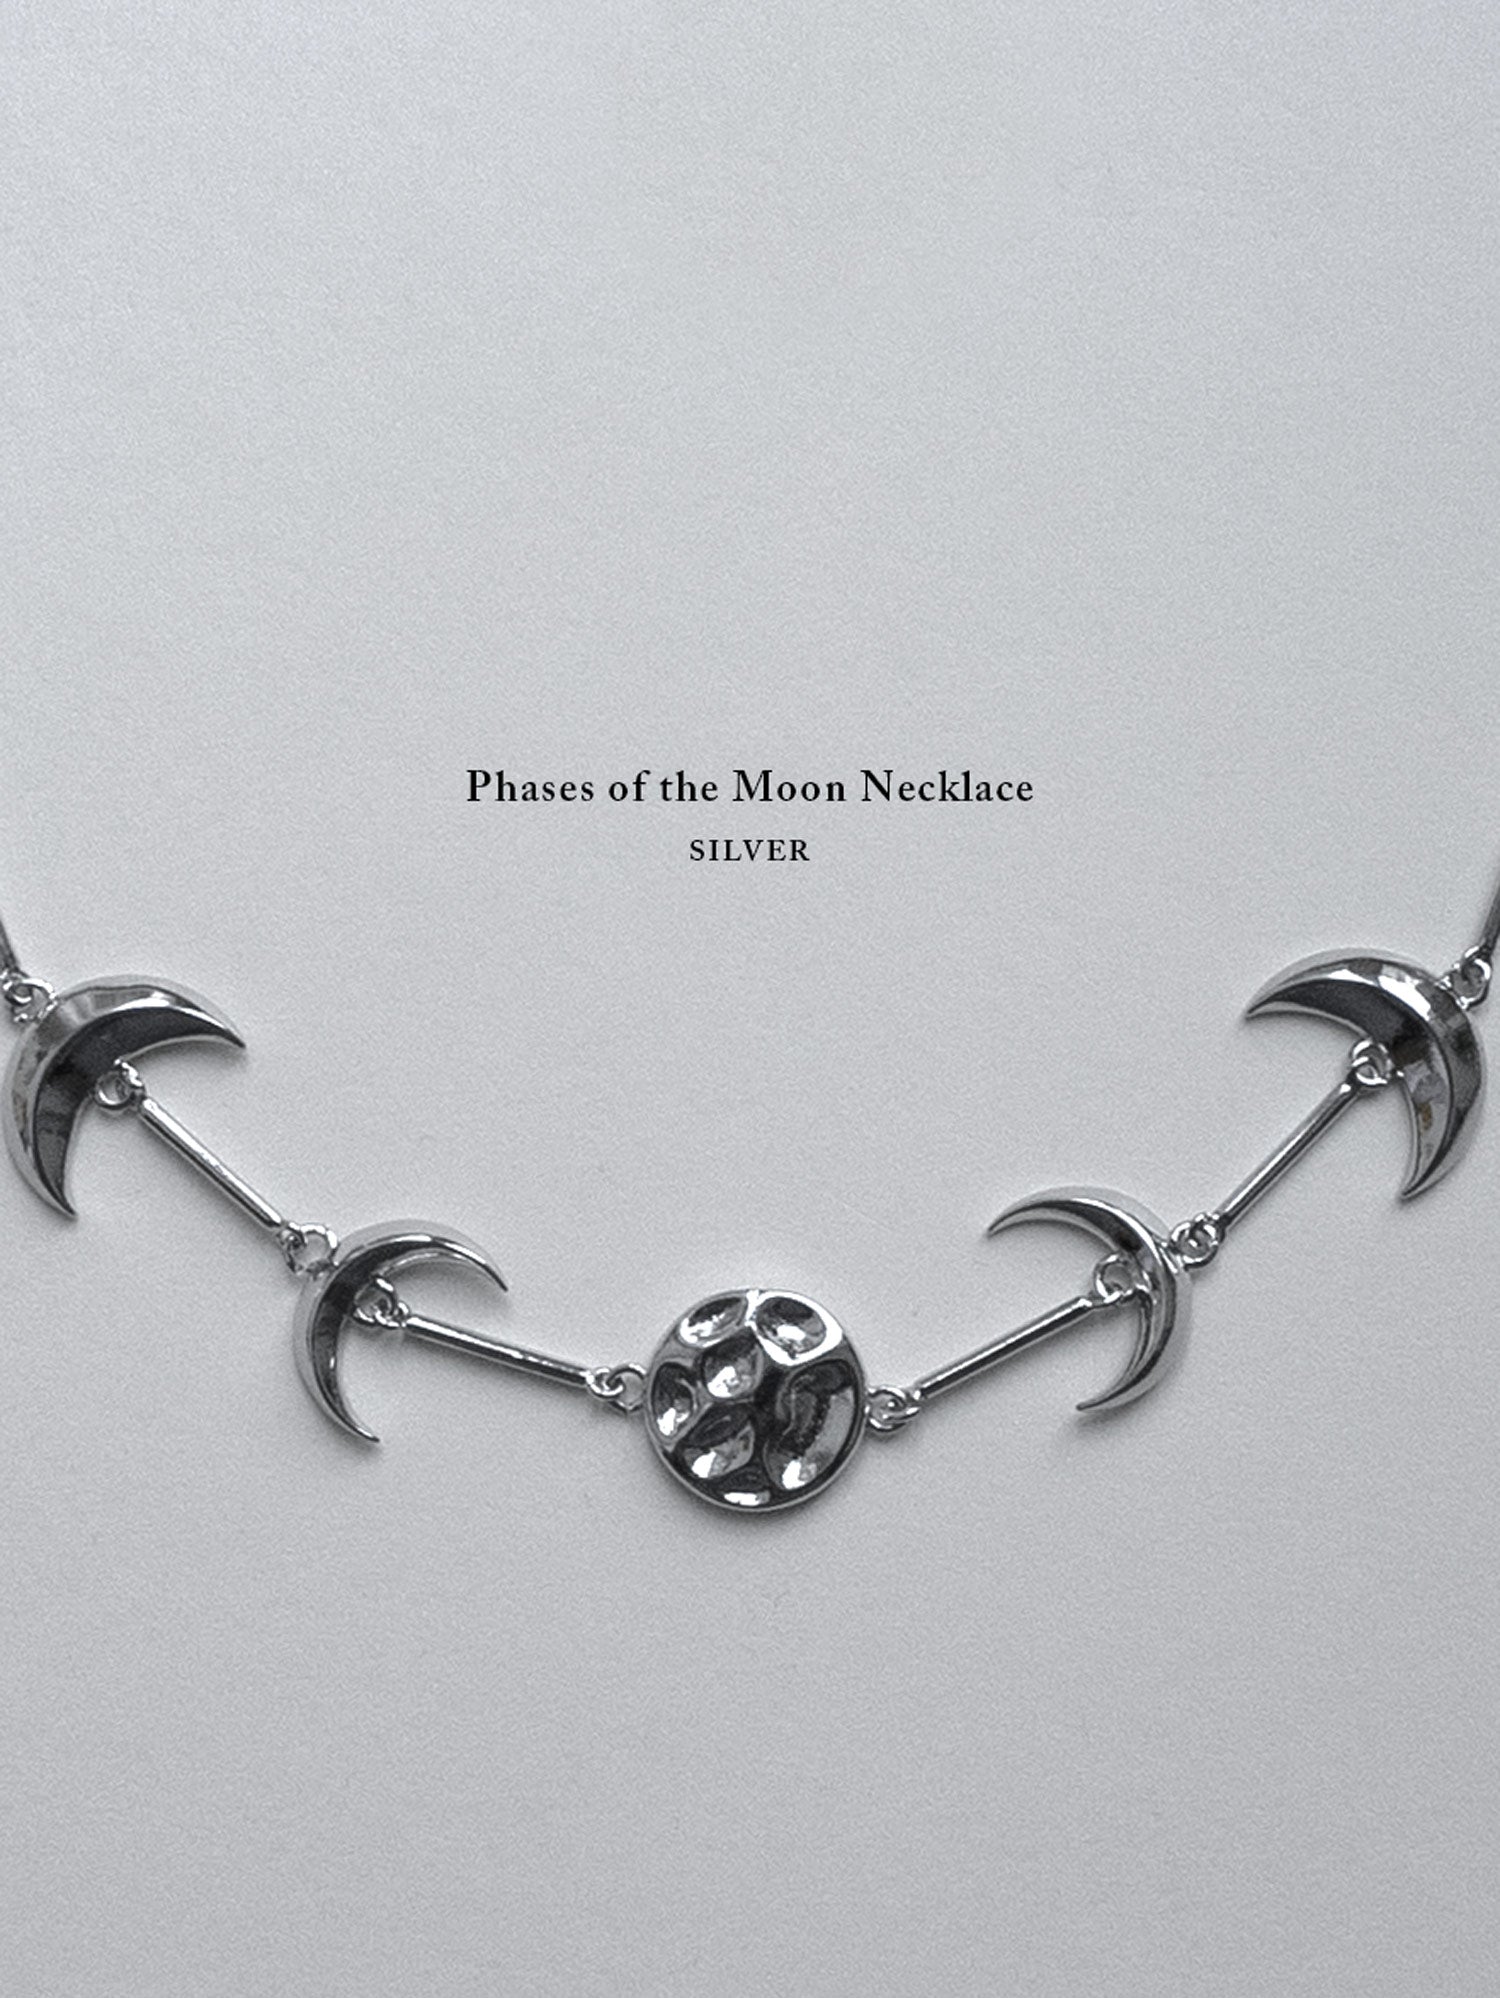 Phases Of The Moon Necklace - Silver